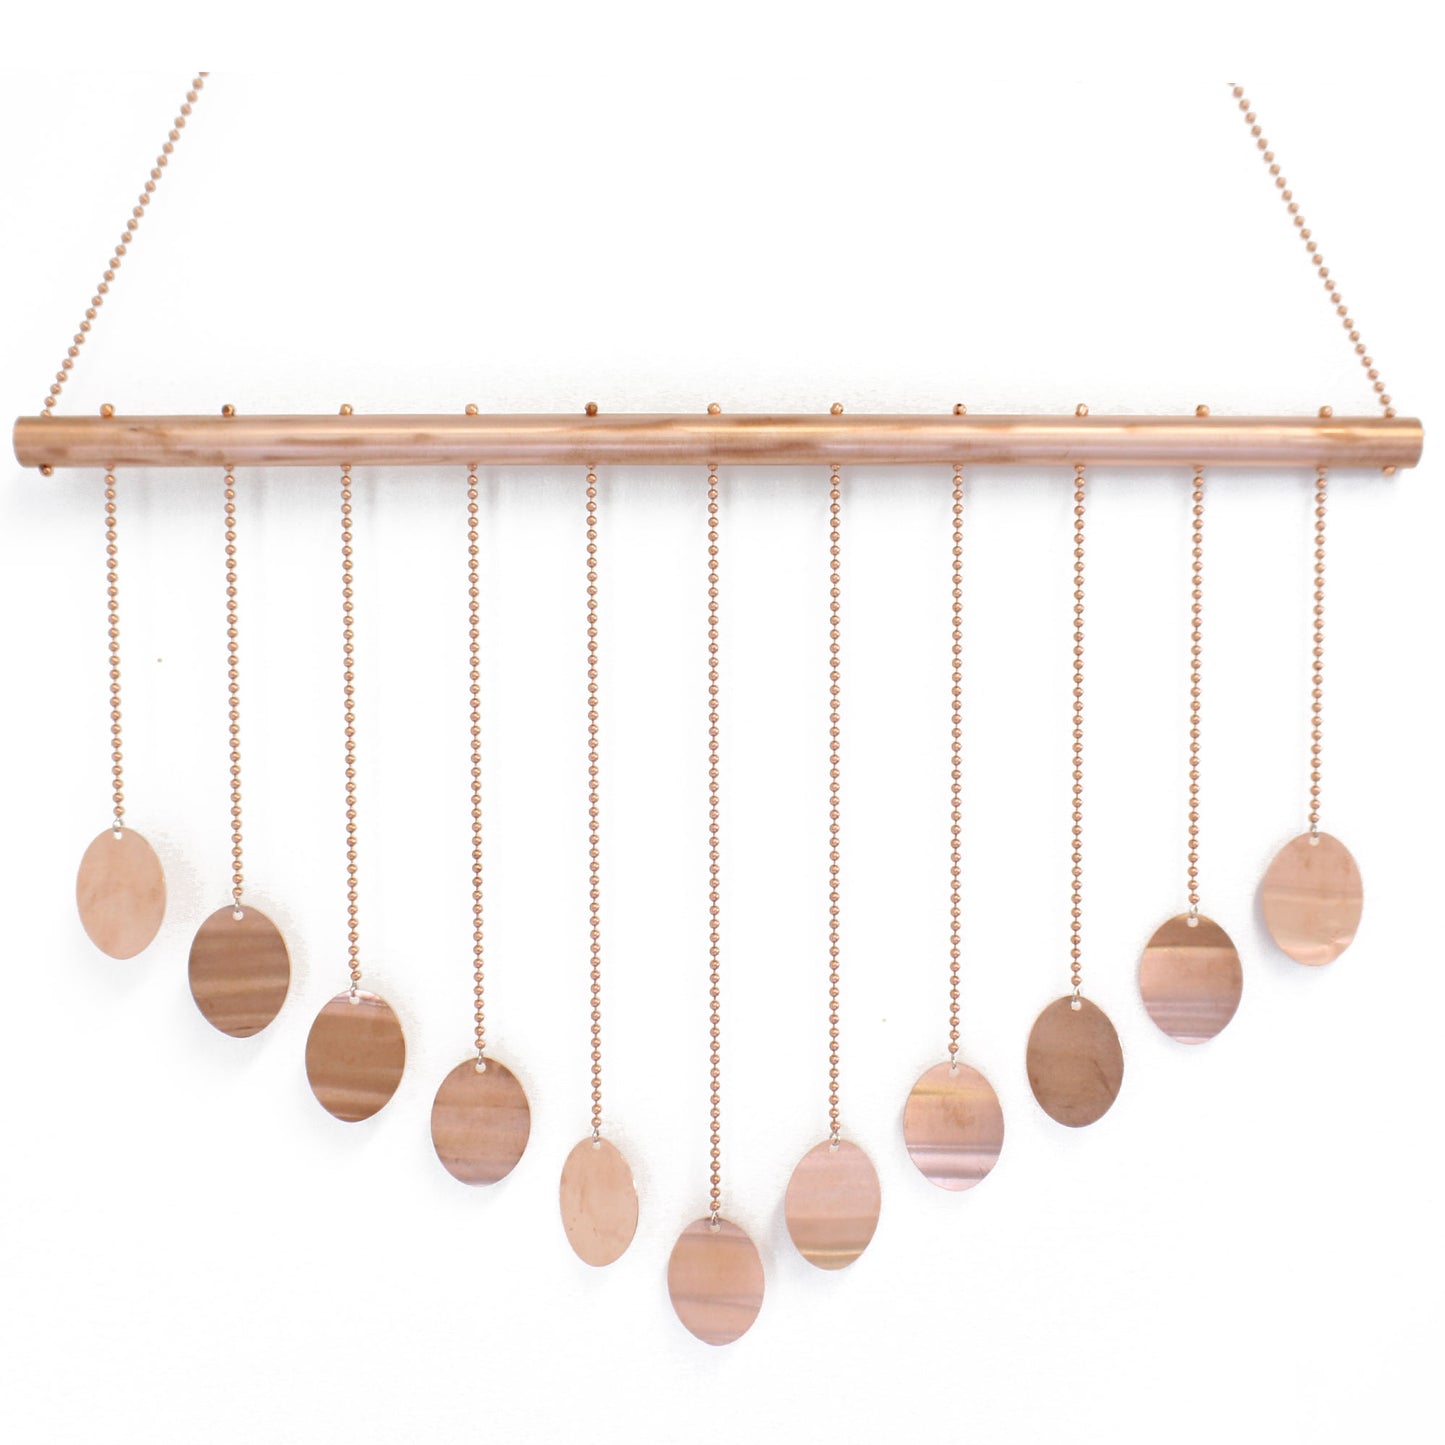 Copper Wind Chime with Circles, Hanging Mobile 30" L